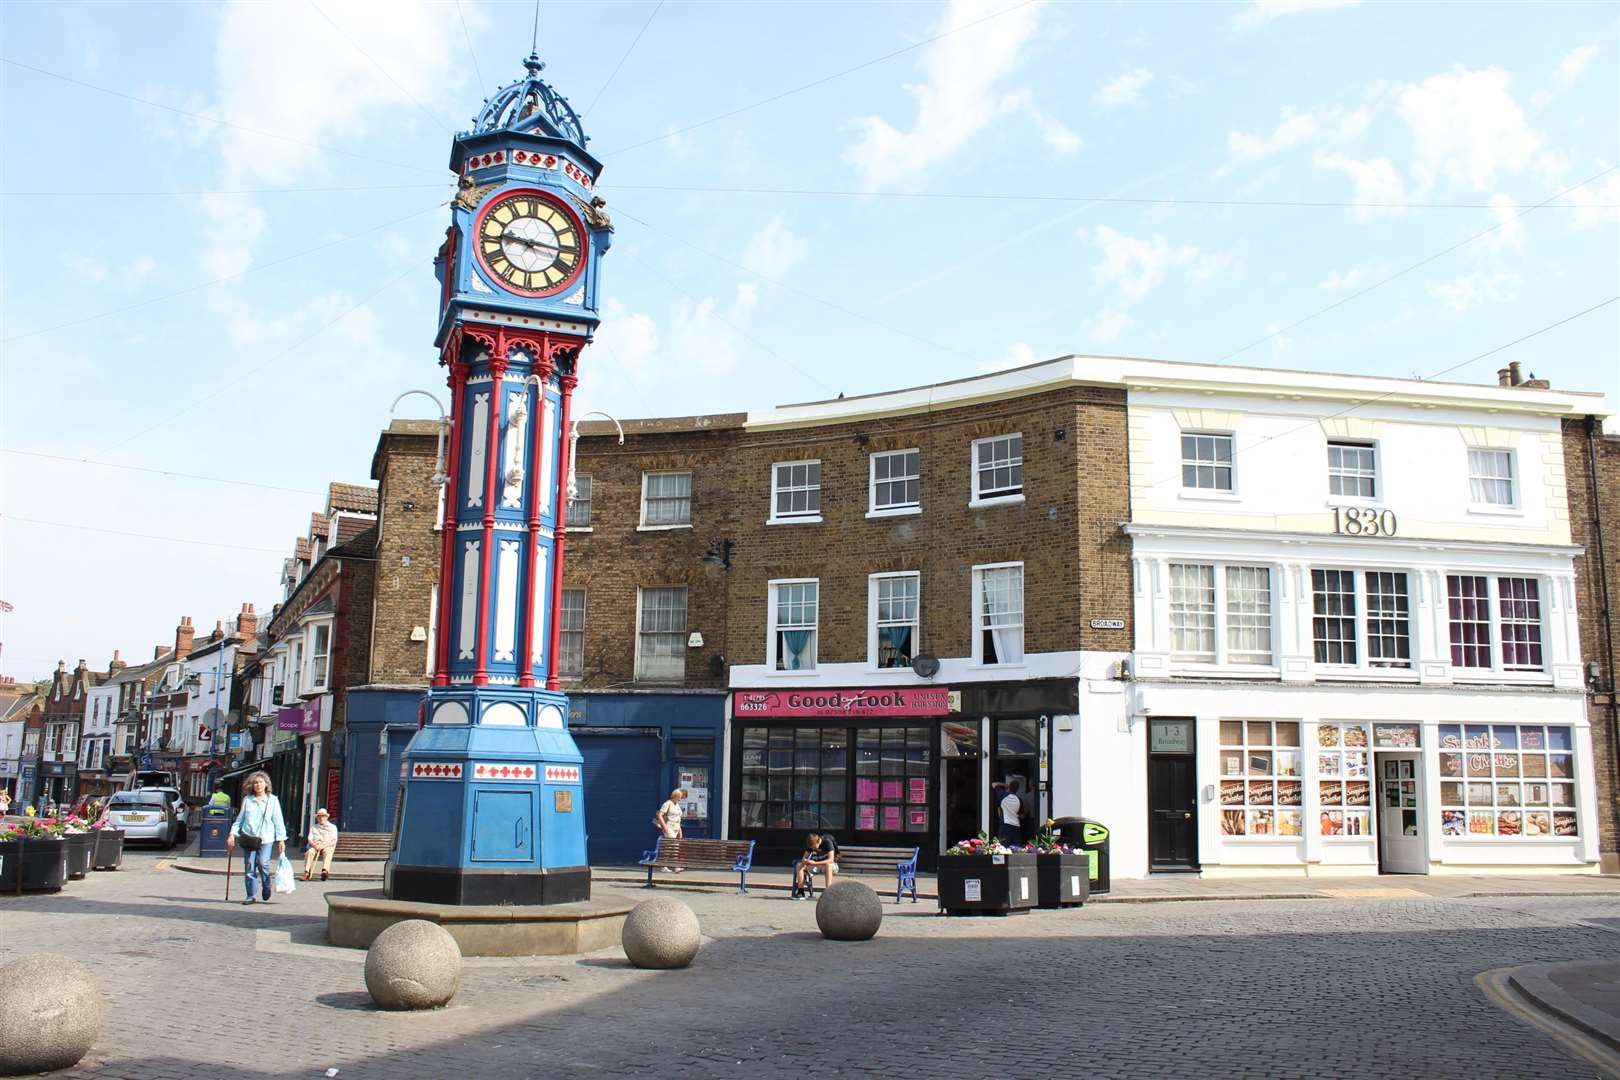 Sheerness, Sittingbourne and Faversham town centers to be